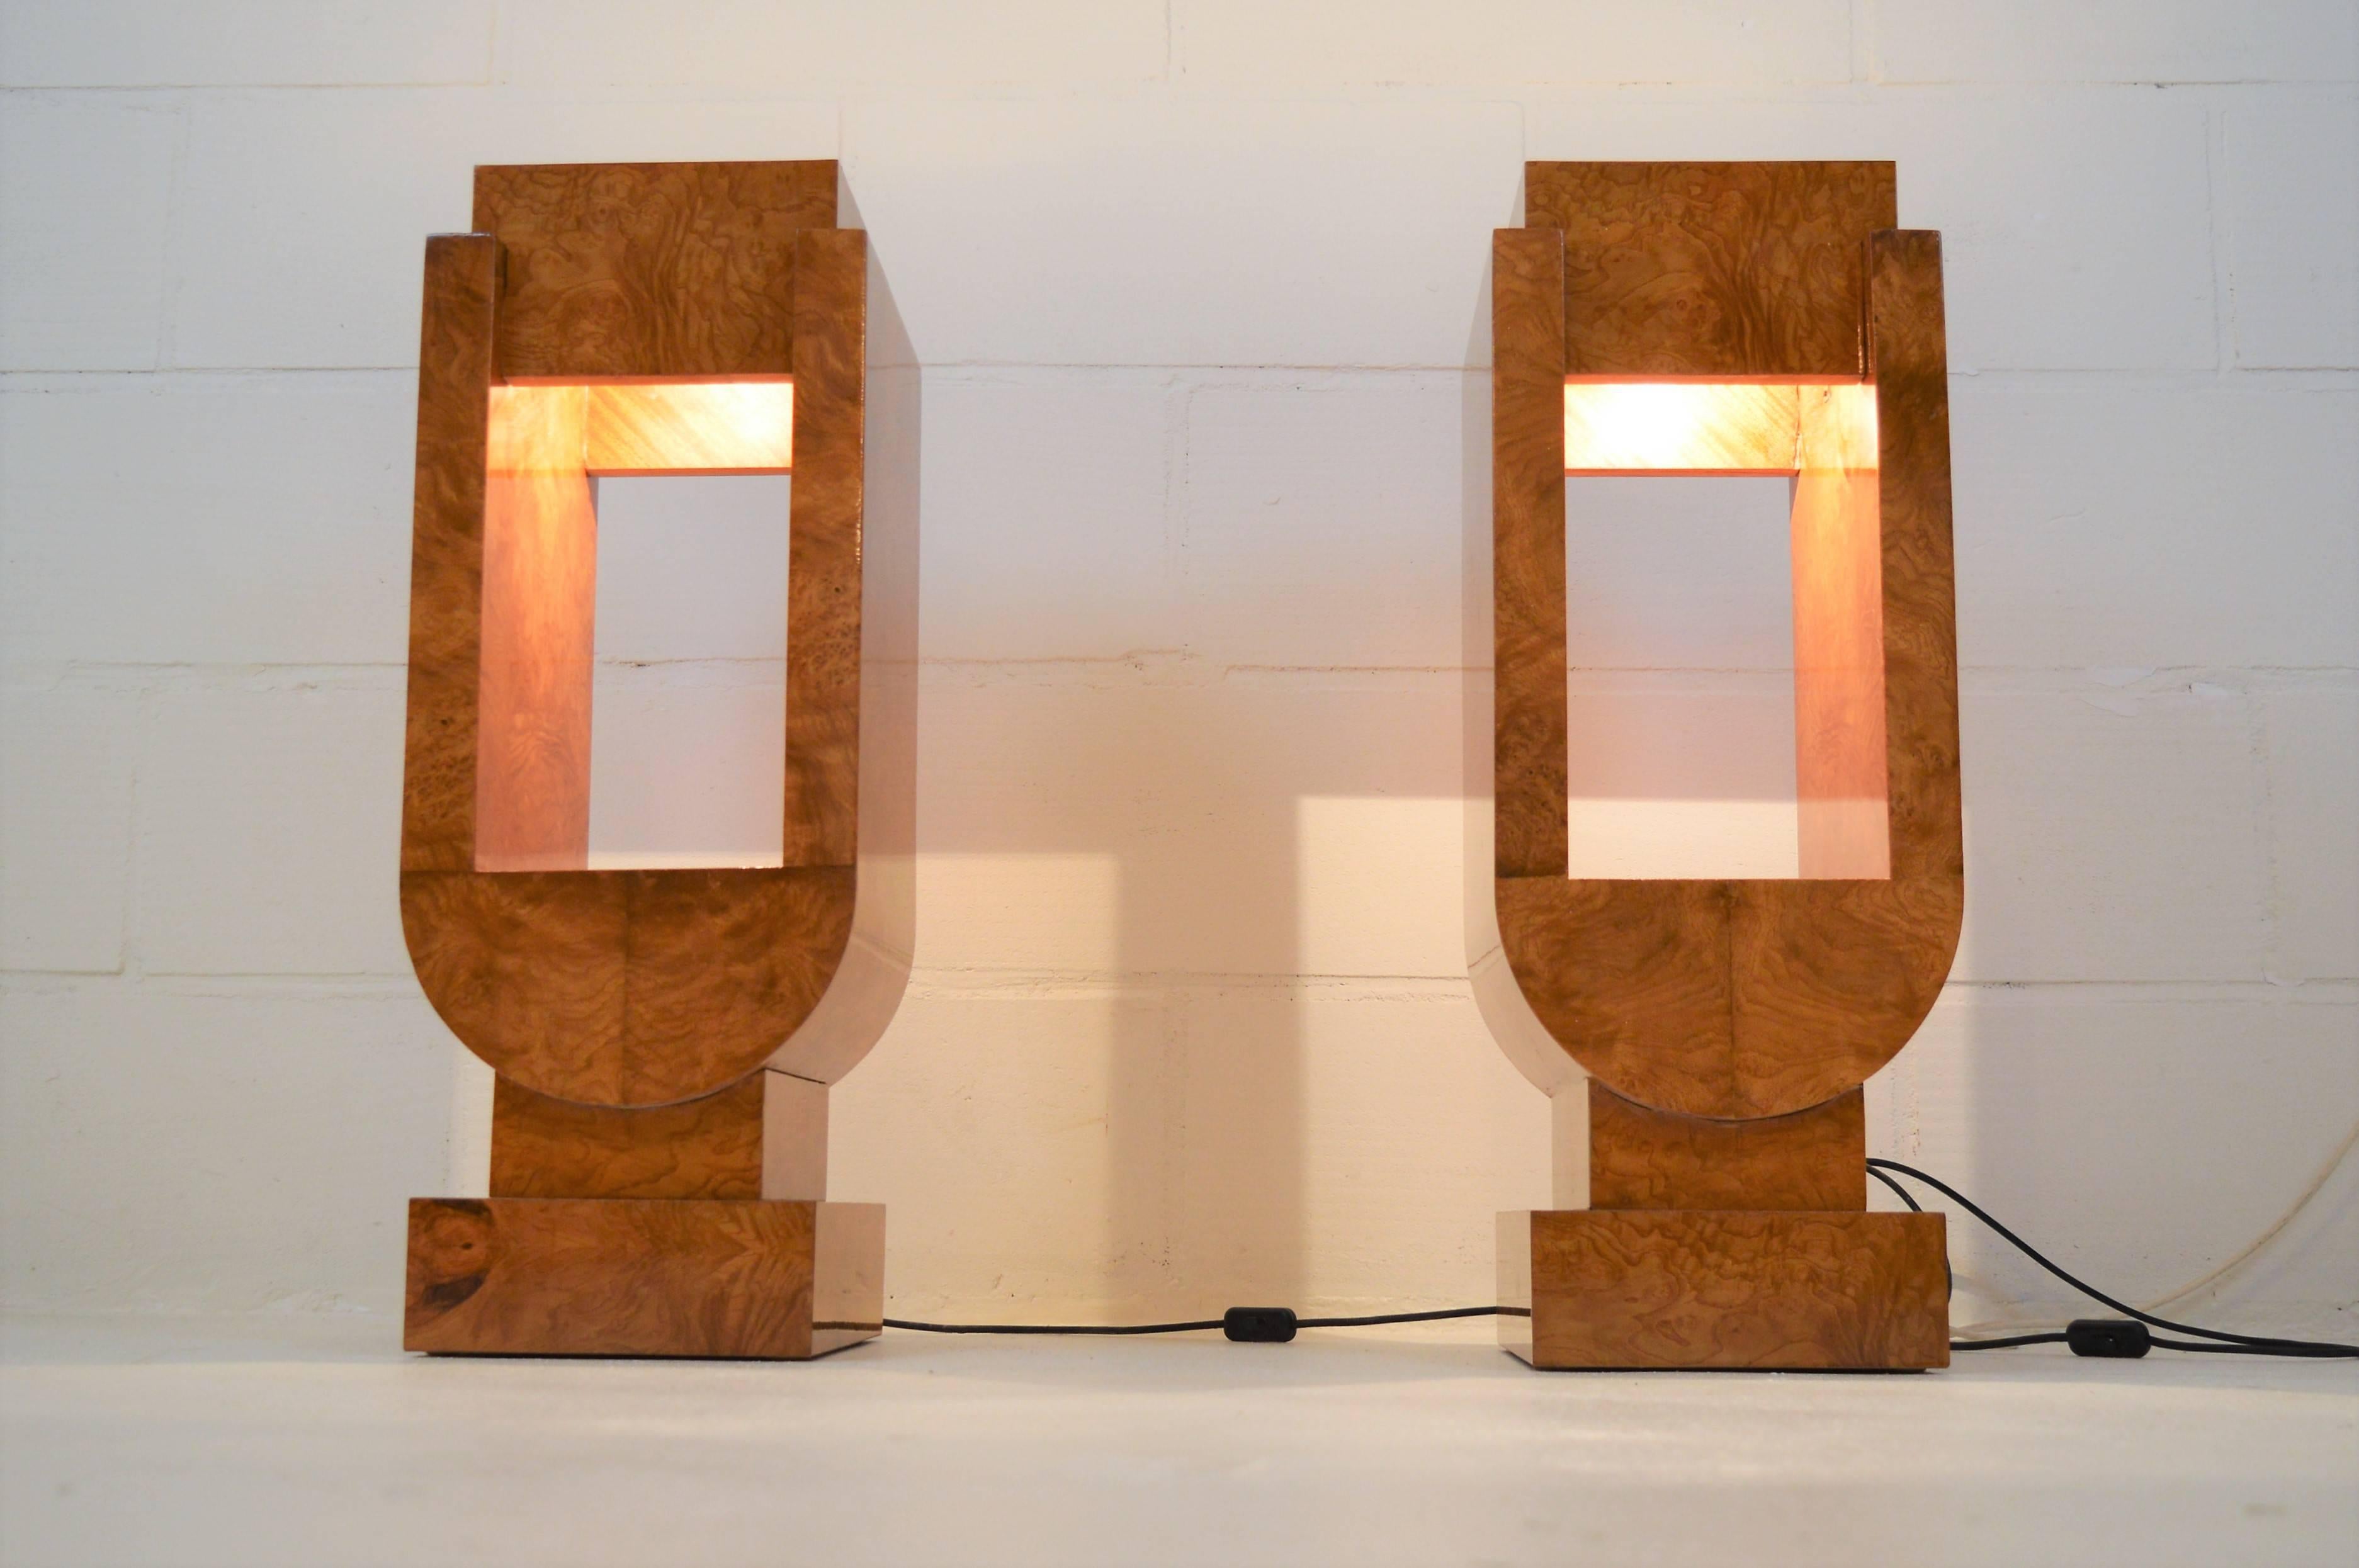 French Pair of Illuminated Art Deco Pedestals in Ash Wood, 1930